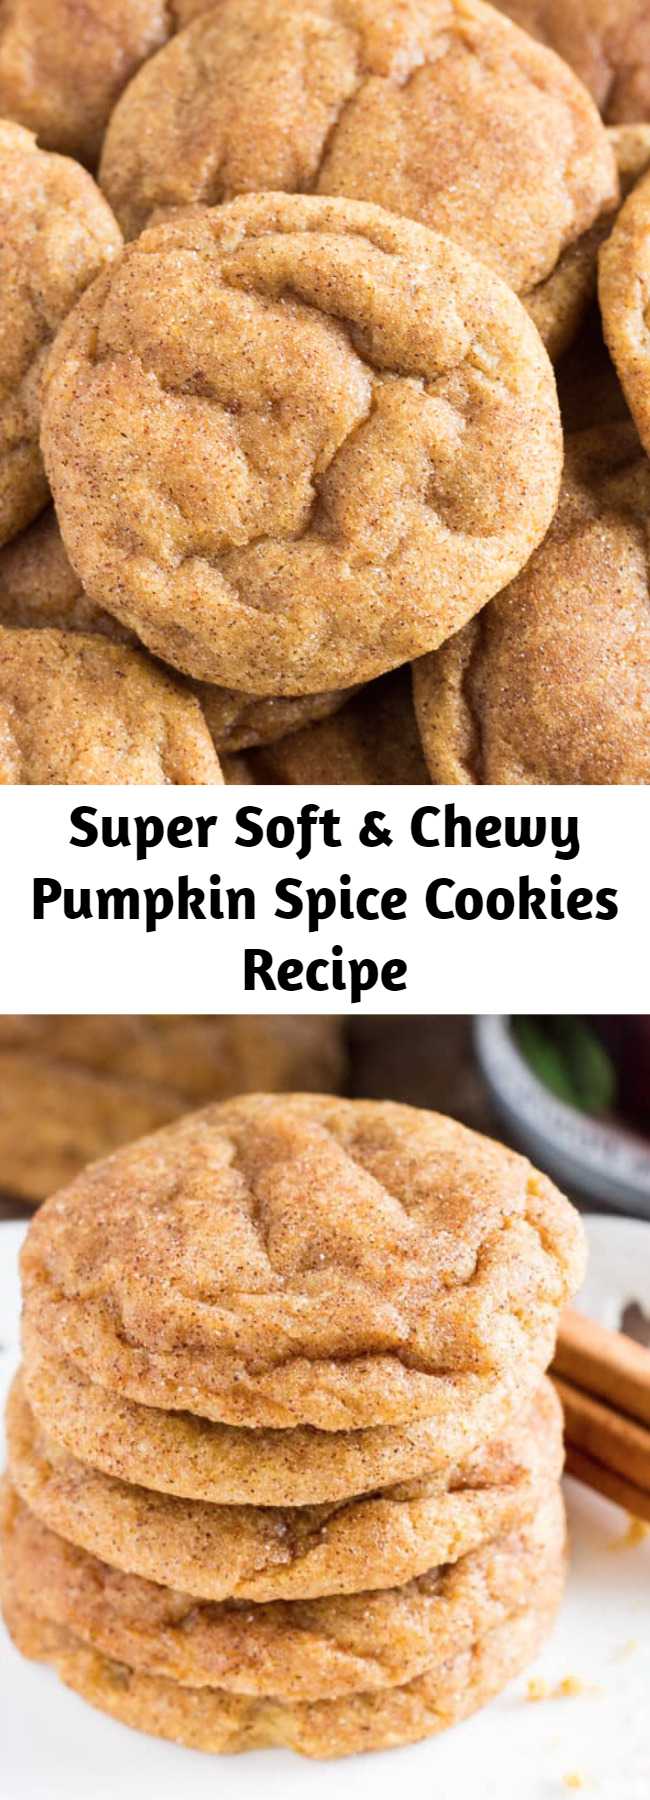 Super Soft & Chewy Pumpkin Spice Cookies Recipe - These pumpkin spice cookies are soft, chewy and perfect for fall. They’re filled with flavor thanks to the pumpkin, vanilla extract, & fall spices. Then they’re rolled in cinnamon sugar for a delicious coating that’ll remind you of snickerdoodles.